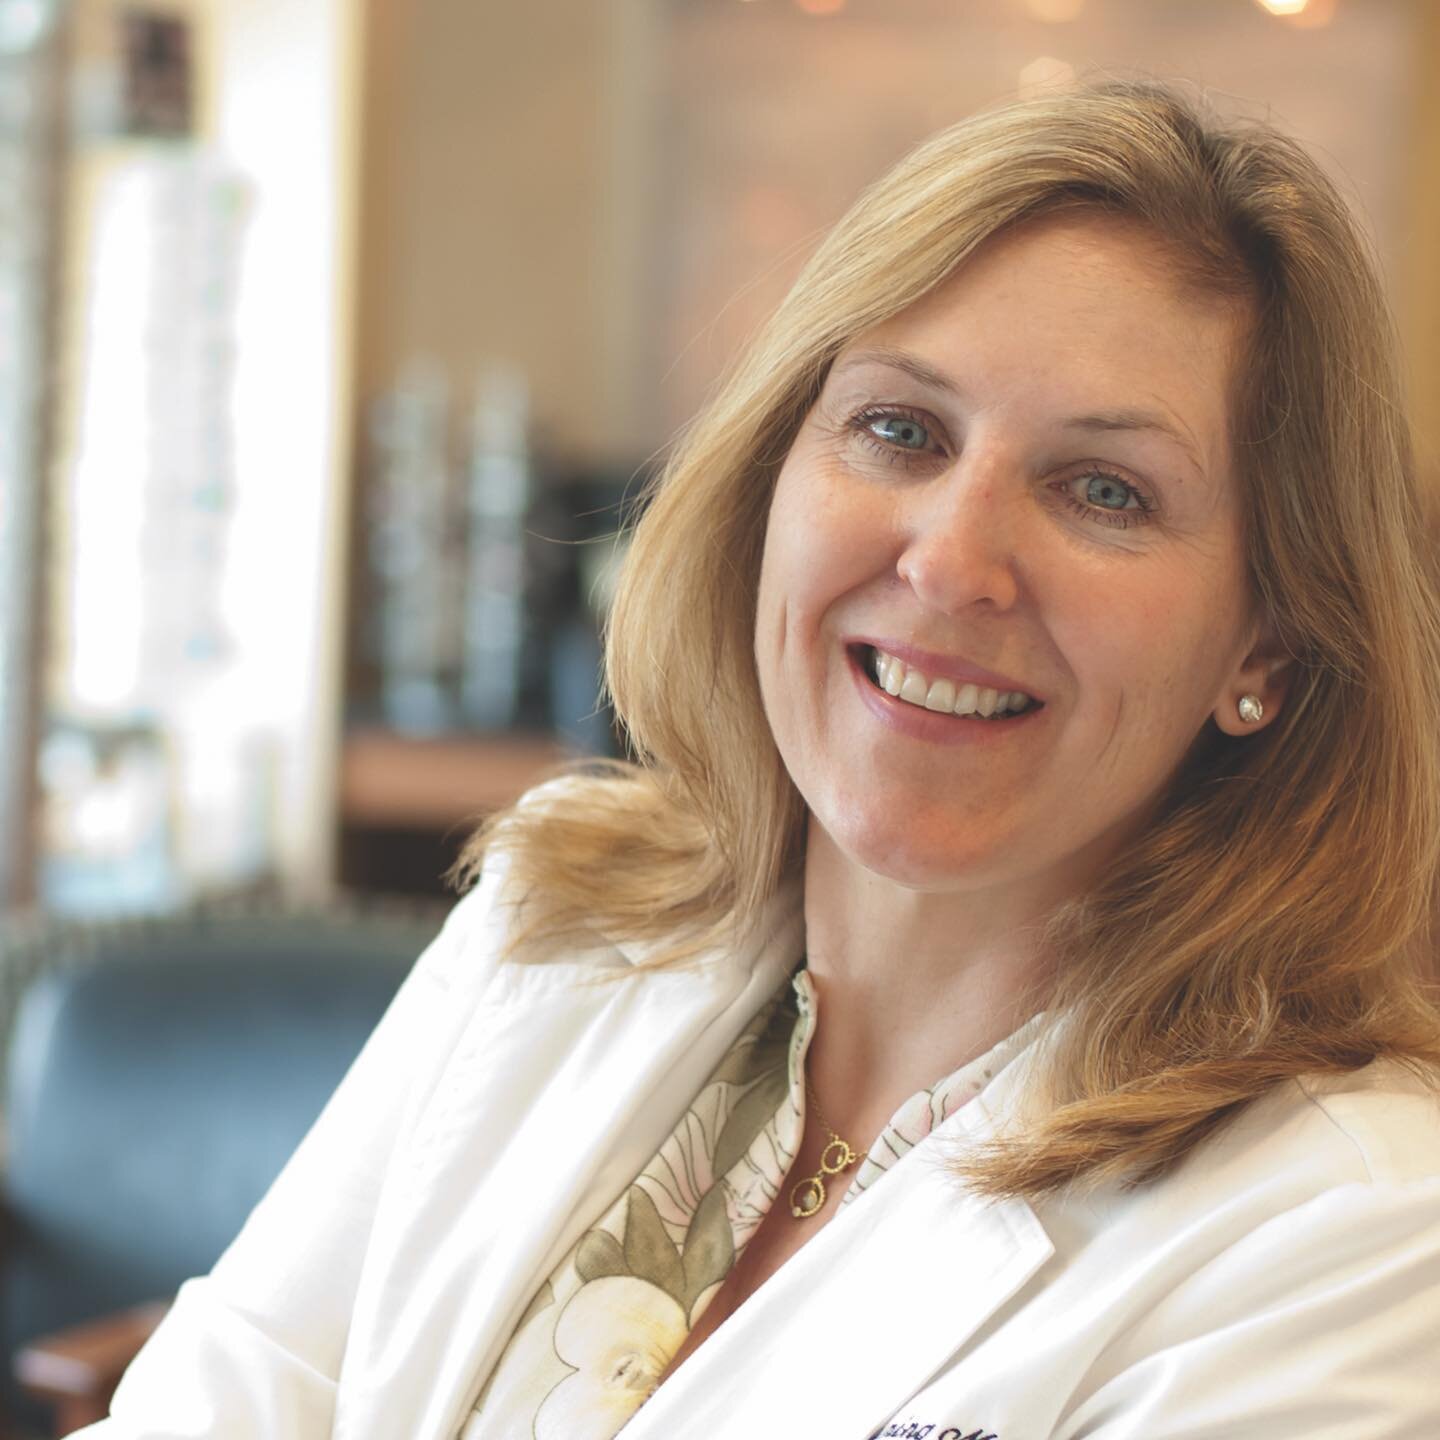 Dr. Beth K. Bruening, M.D.  Comprehensive Ophthalmologist

Ophthalmic Surgeon

Dr. Beth Bruening specializes in no-stitch cataract surgery, a same day procedure that replaces the cloudy cataract lens with a clear intraocular lens implant. She has bee